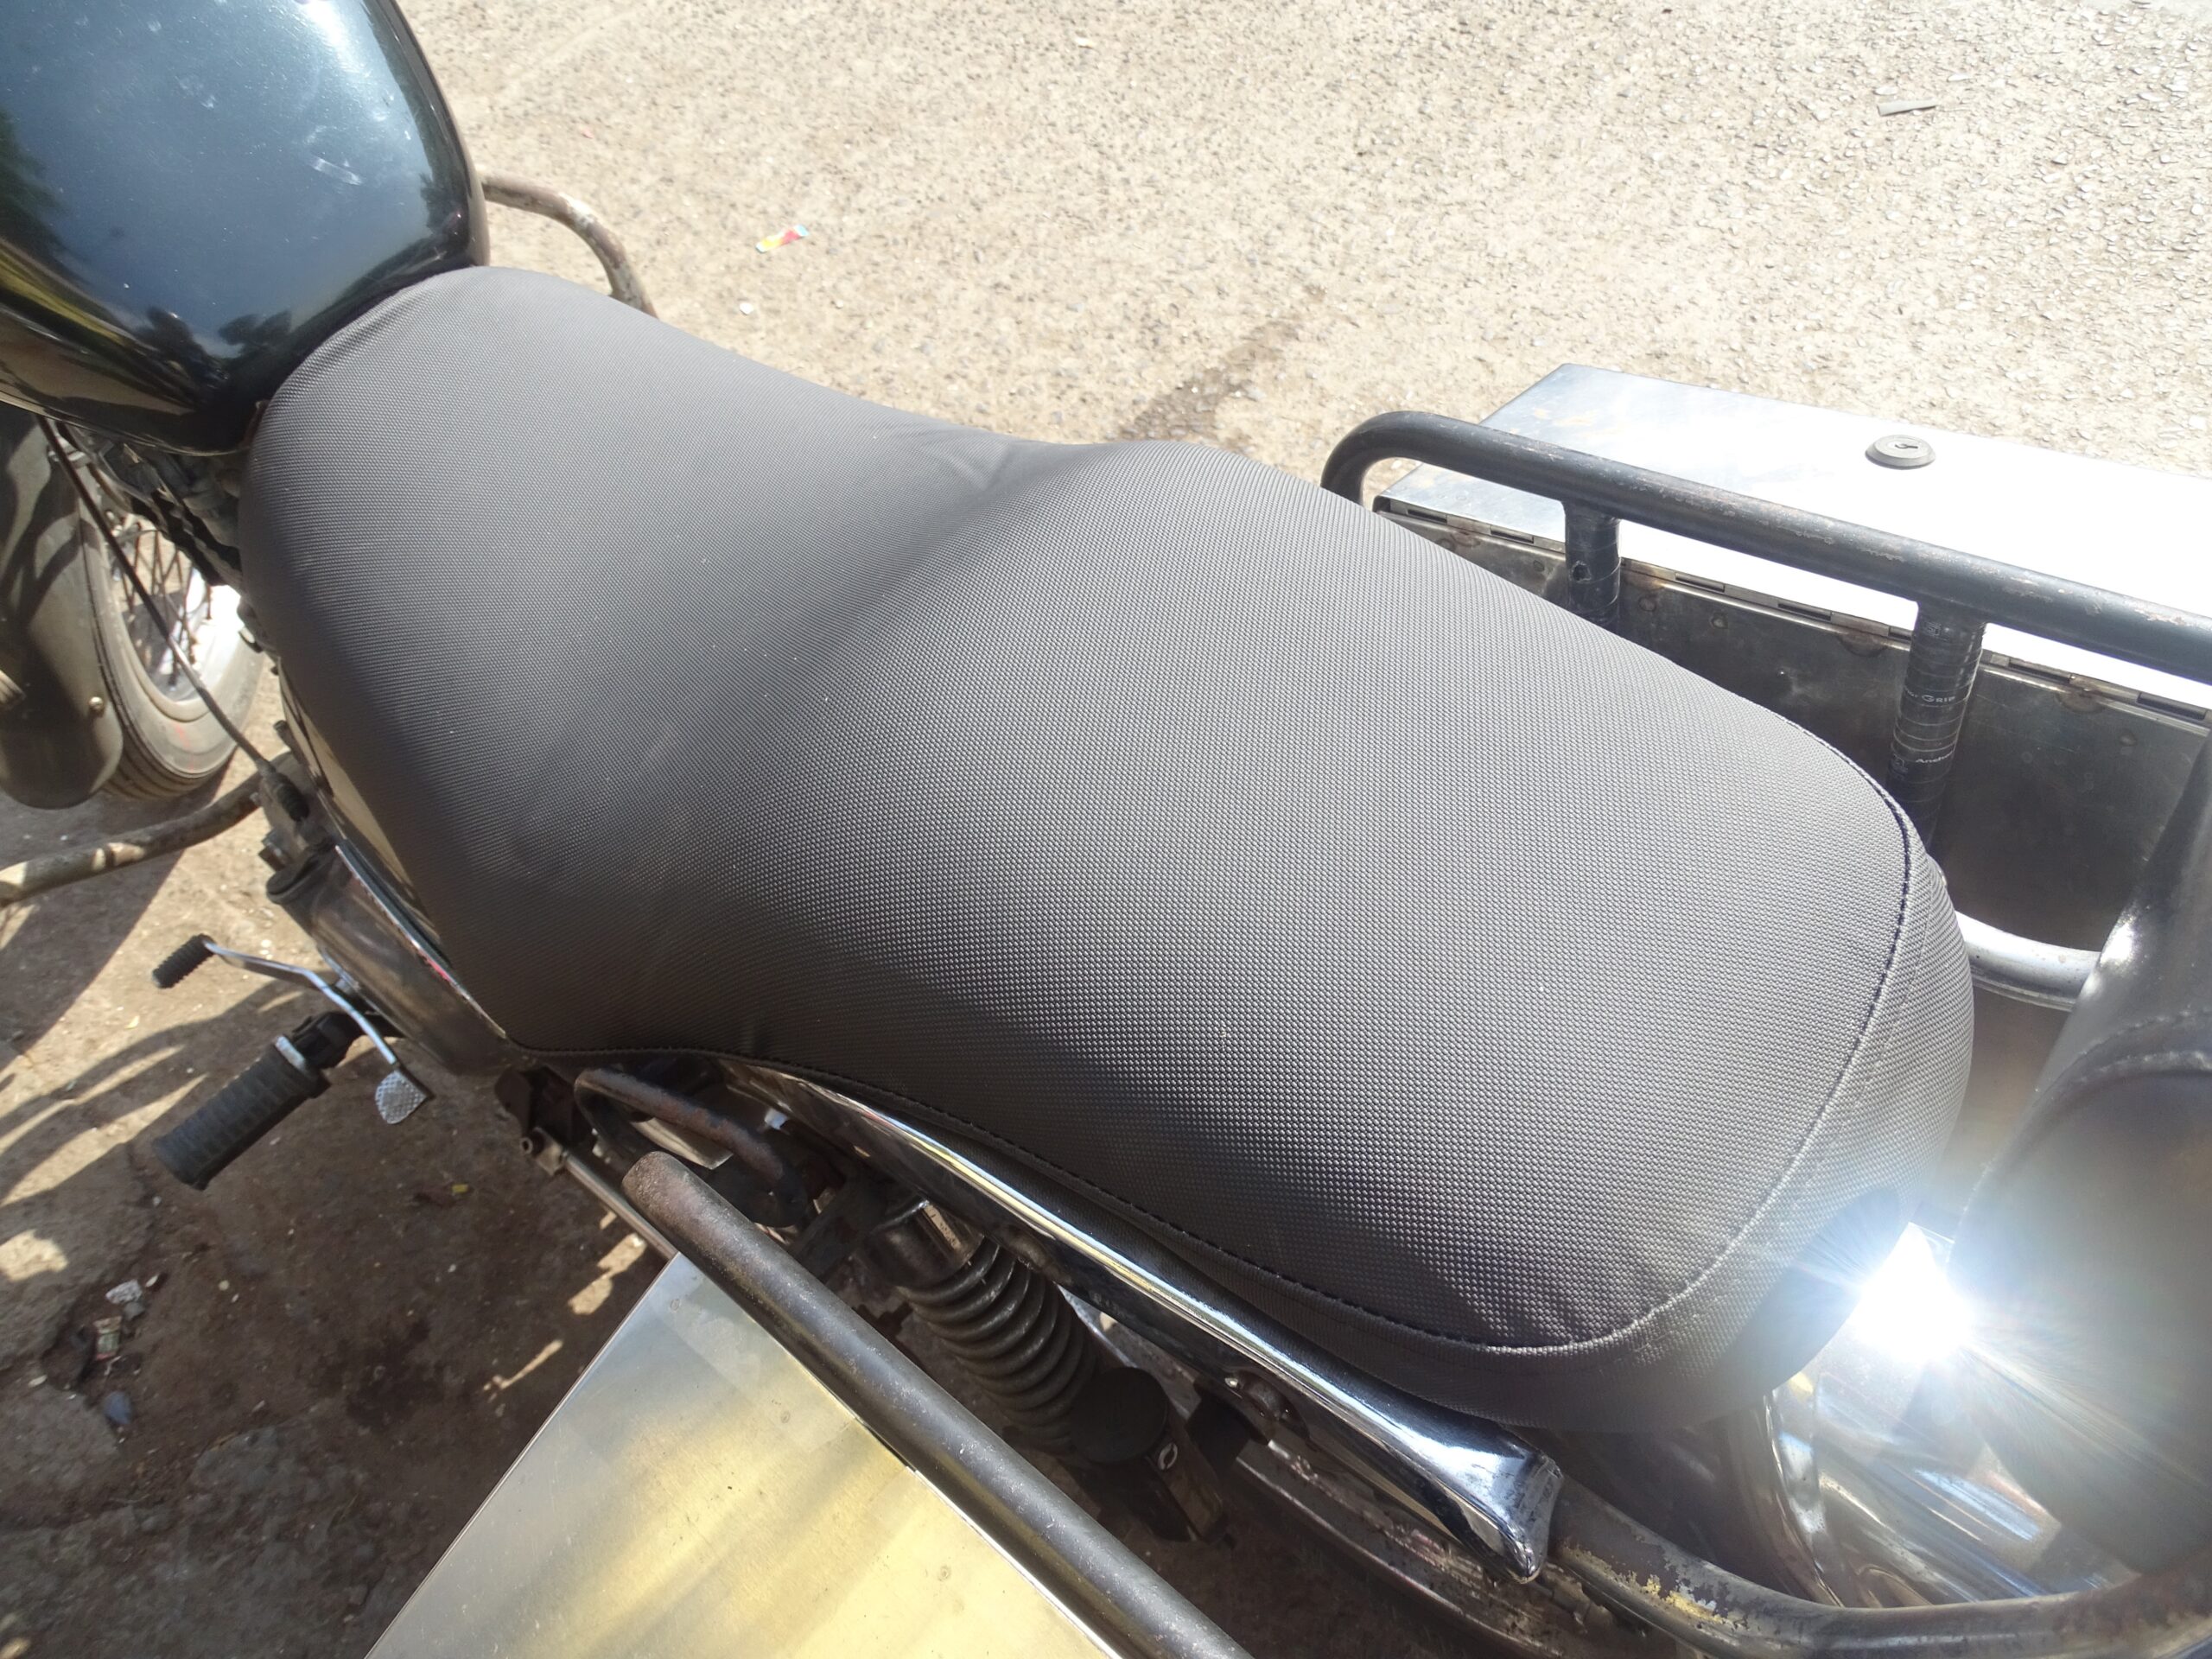 Royal Enfield Thunderbird 350 - 2010 Model now with New Seat Cover